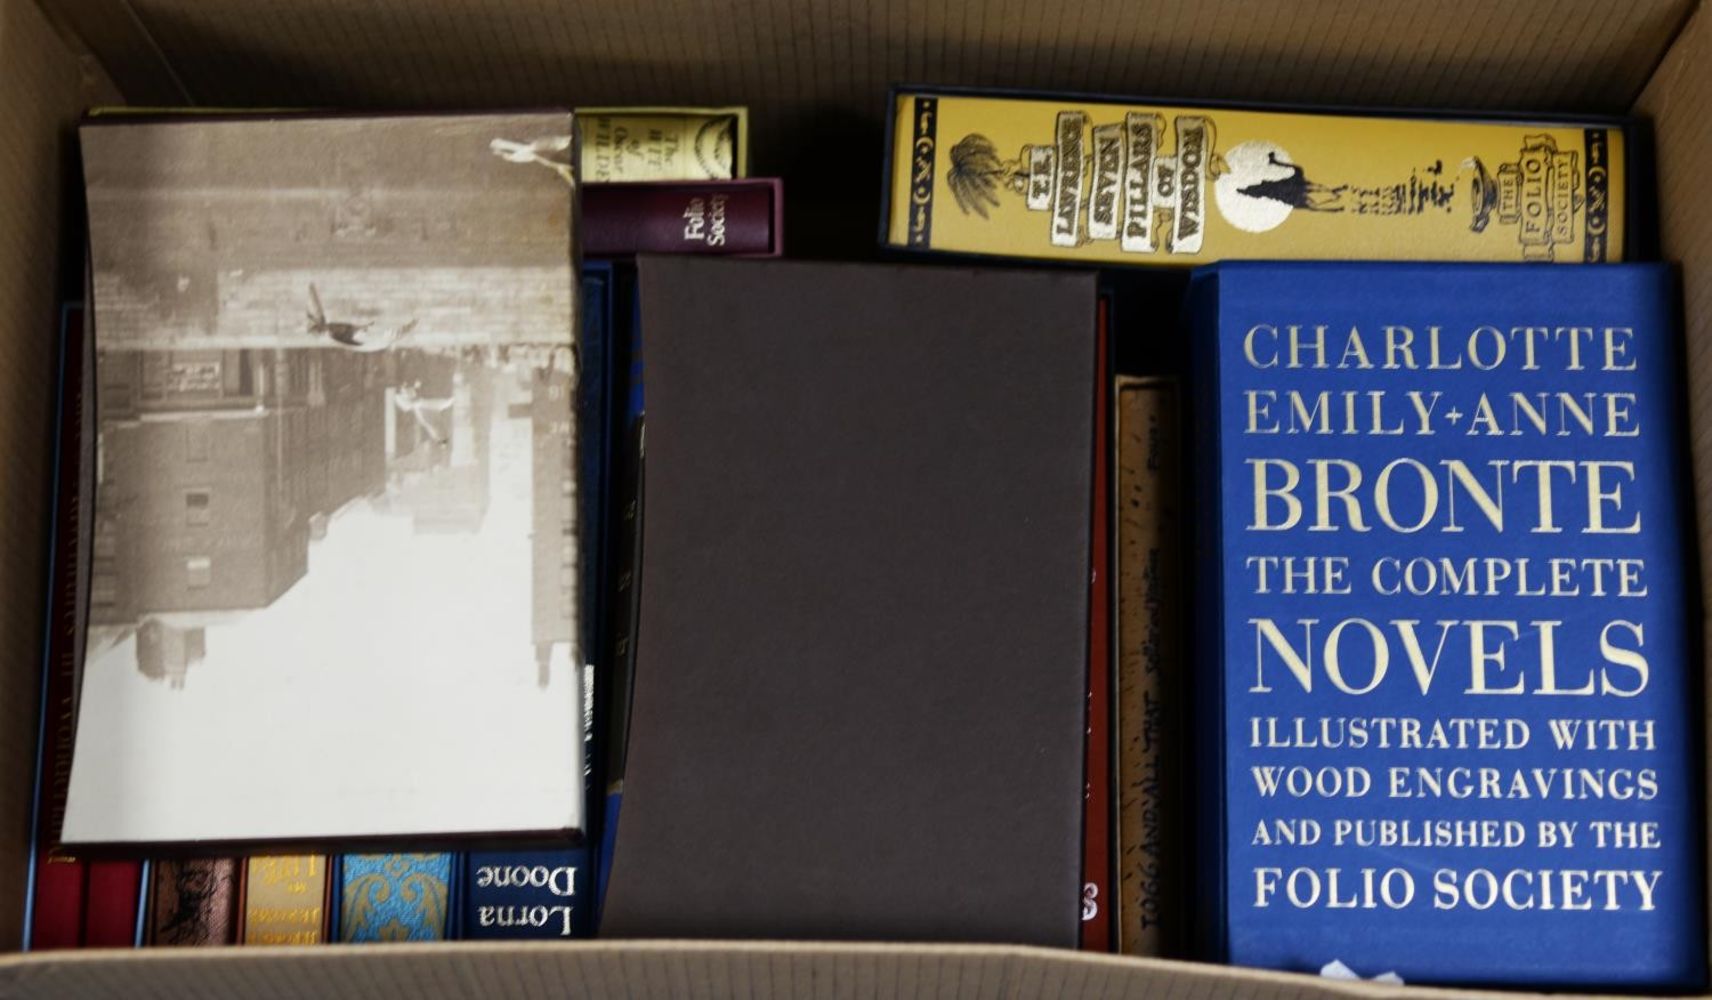 Antiquarian and Collectable Books, Prints & Modern Art